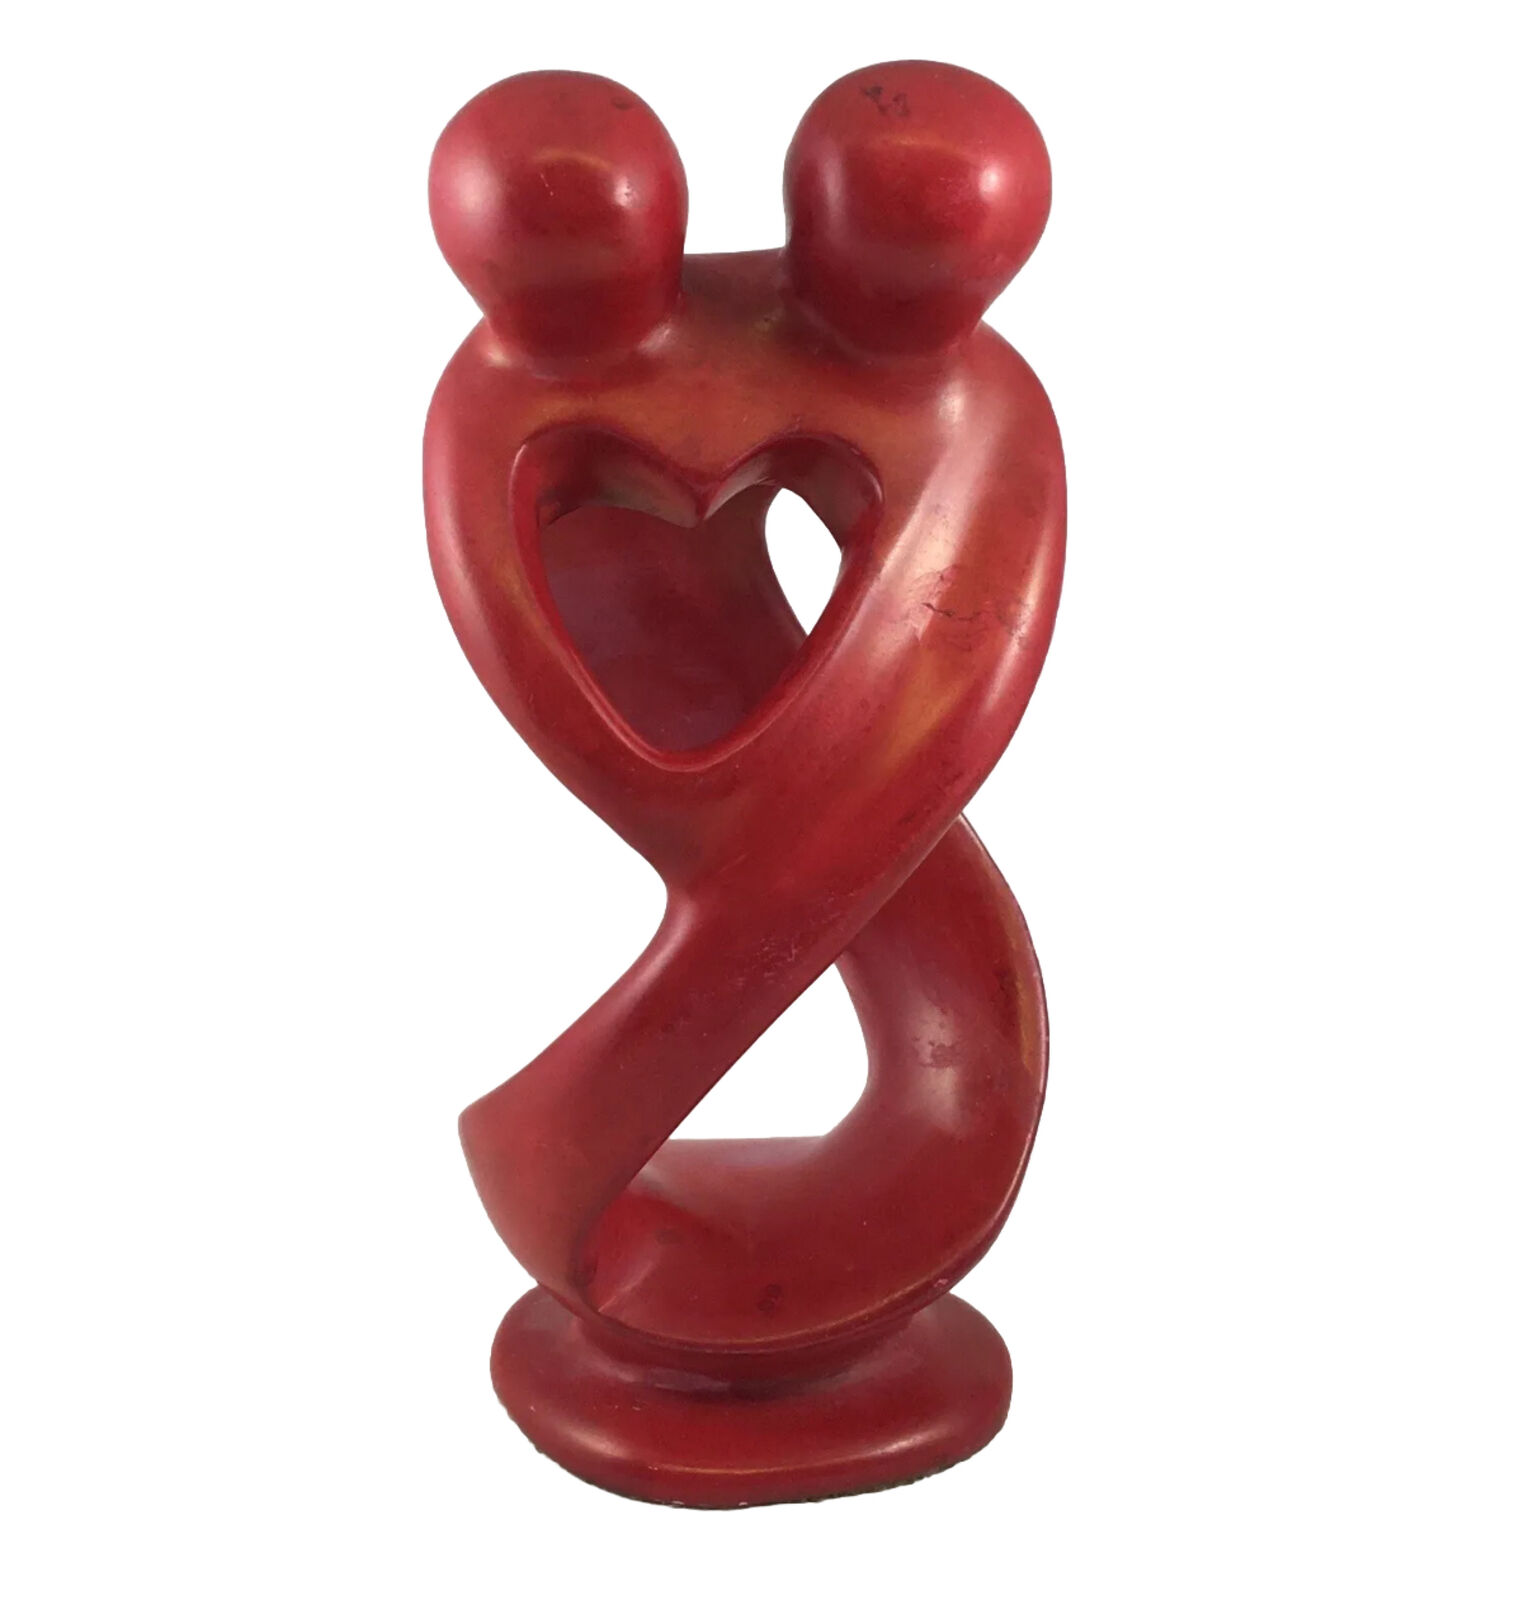 LOVERS Figurine Handmade Carved Red Soapstone  Abstract Art Statue From Kenya 8”